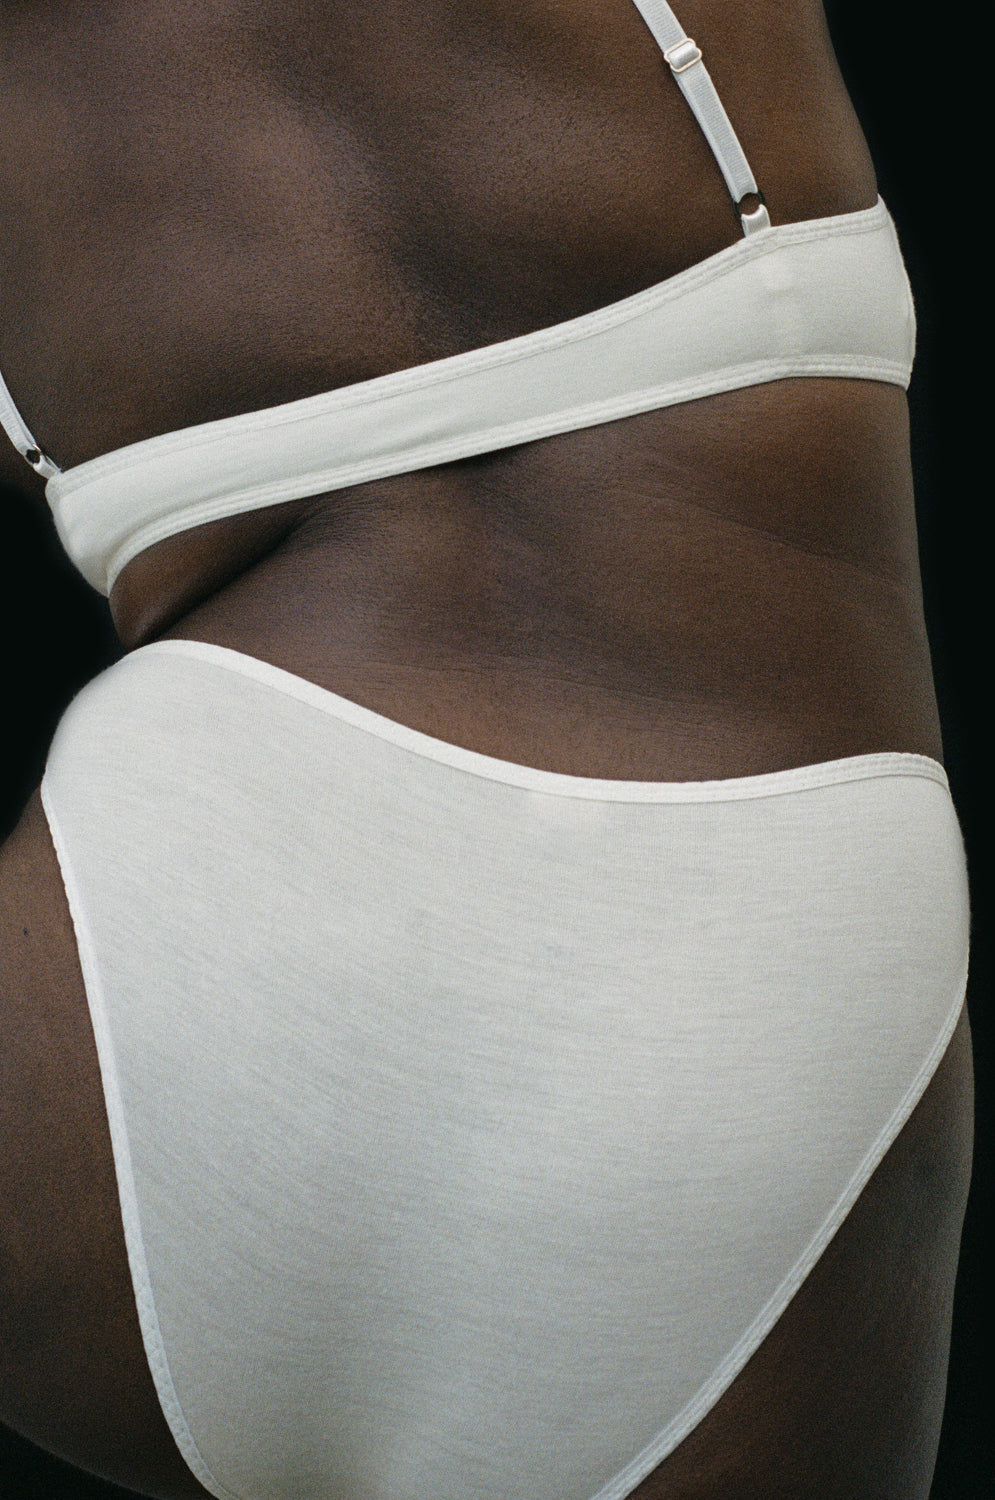 A view of the back of the Kye Intimates Recline Brief in the color Natural. mid rise underwear that provide moderate coverage. Made from soft, environmentally conscious bamboo that is naturally moisture wicking and bacteria resistant. These breathable panties have temperature regulation properties making them a comfortable choice to wear to bed.